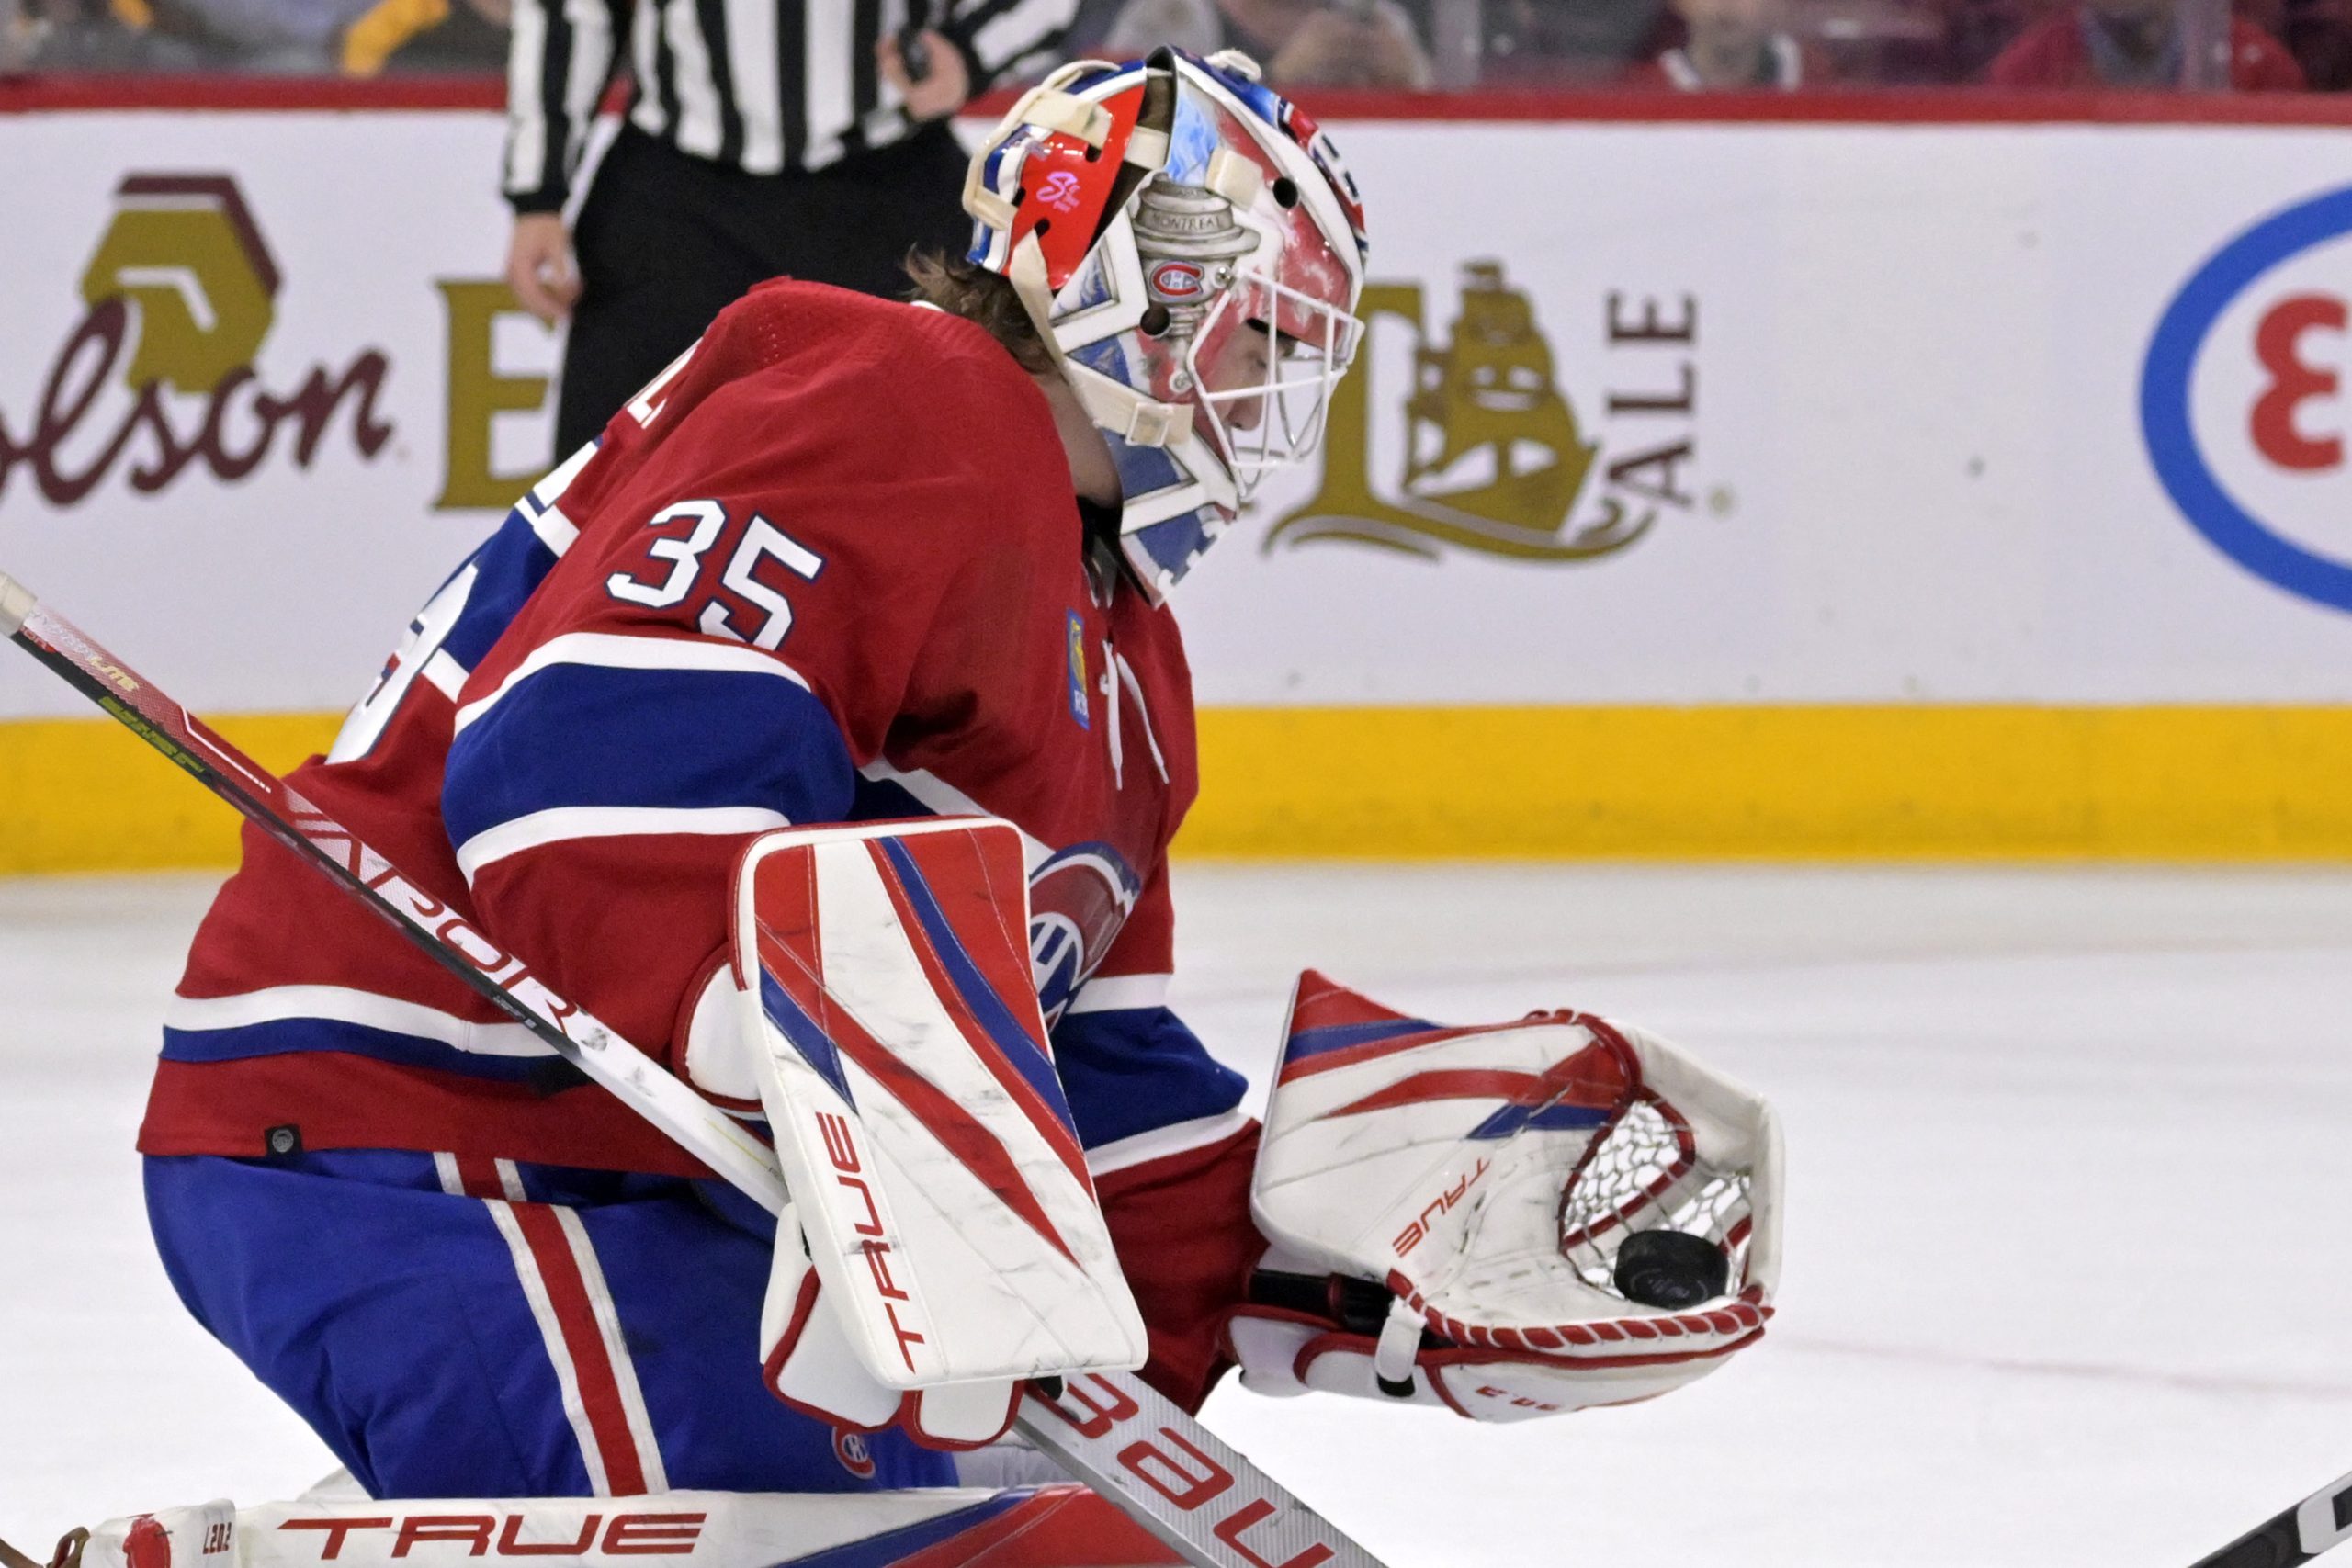 Montreal vs Philadelphia - Who does the NHL want to win this the least?